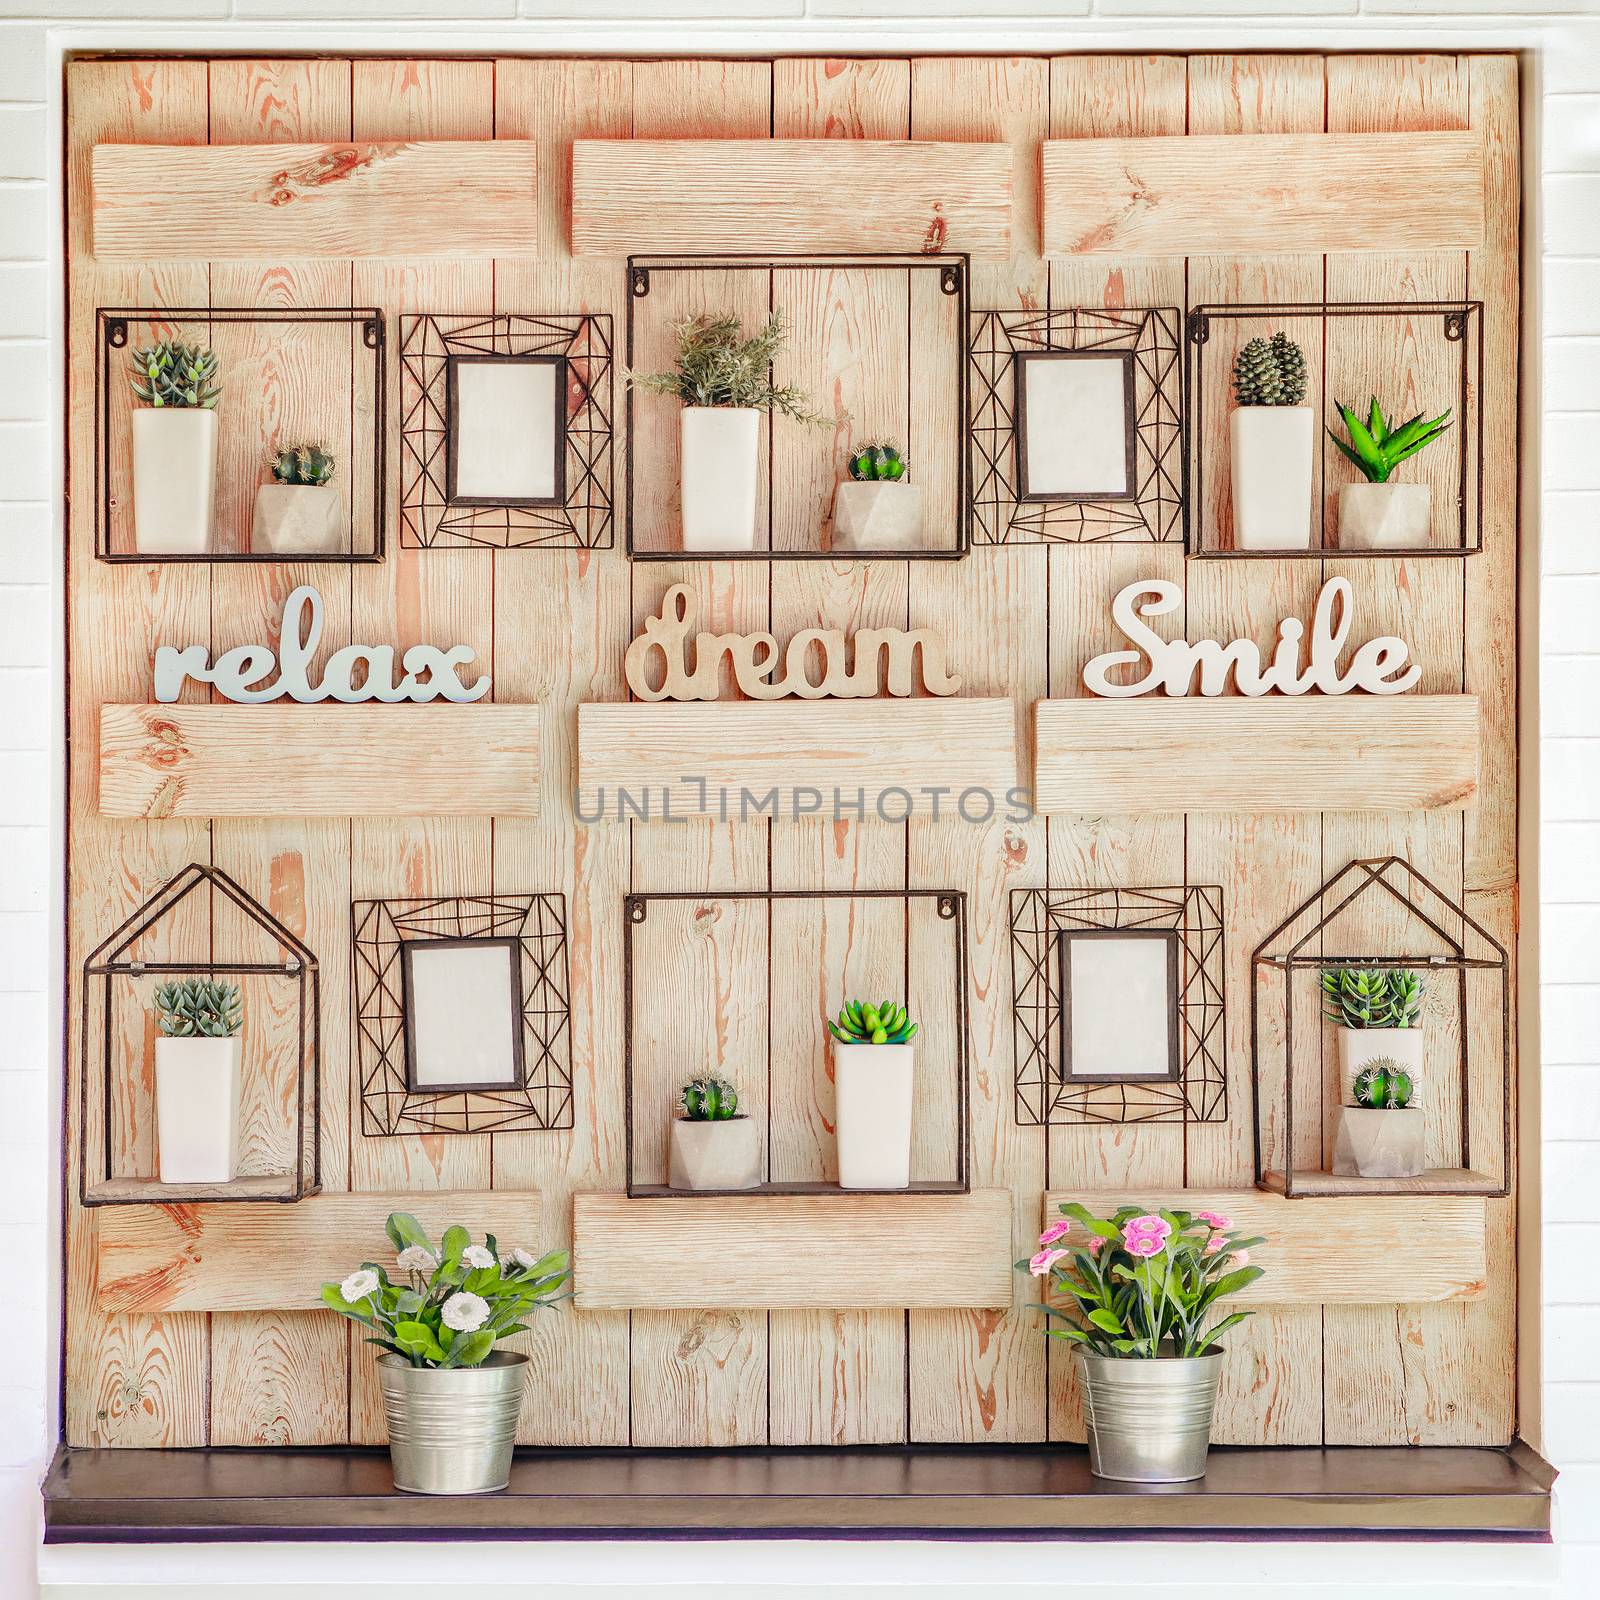 Decorative hanging on the wall. Rustic style in interior, exterior decoration. Wooden wall decorated with white pots with green plants and photo frames. Vintage style, accessories, modern garden decor by synel